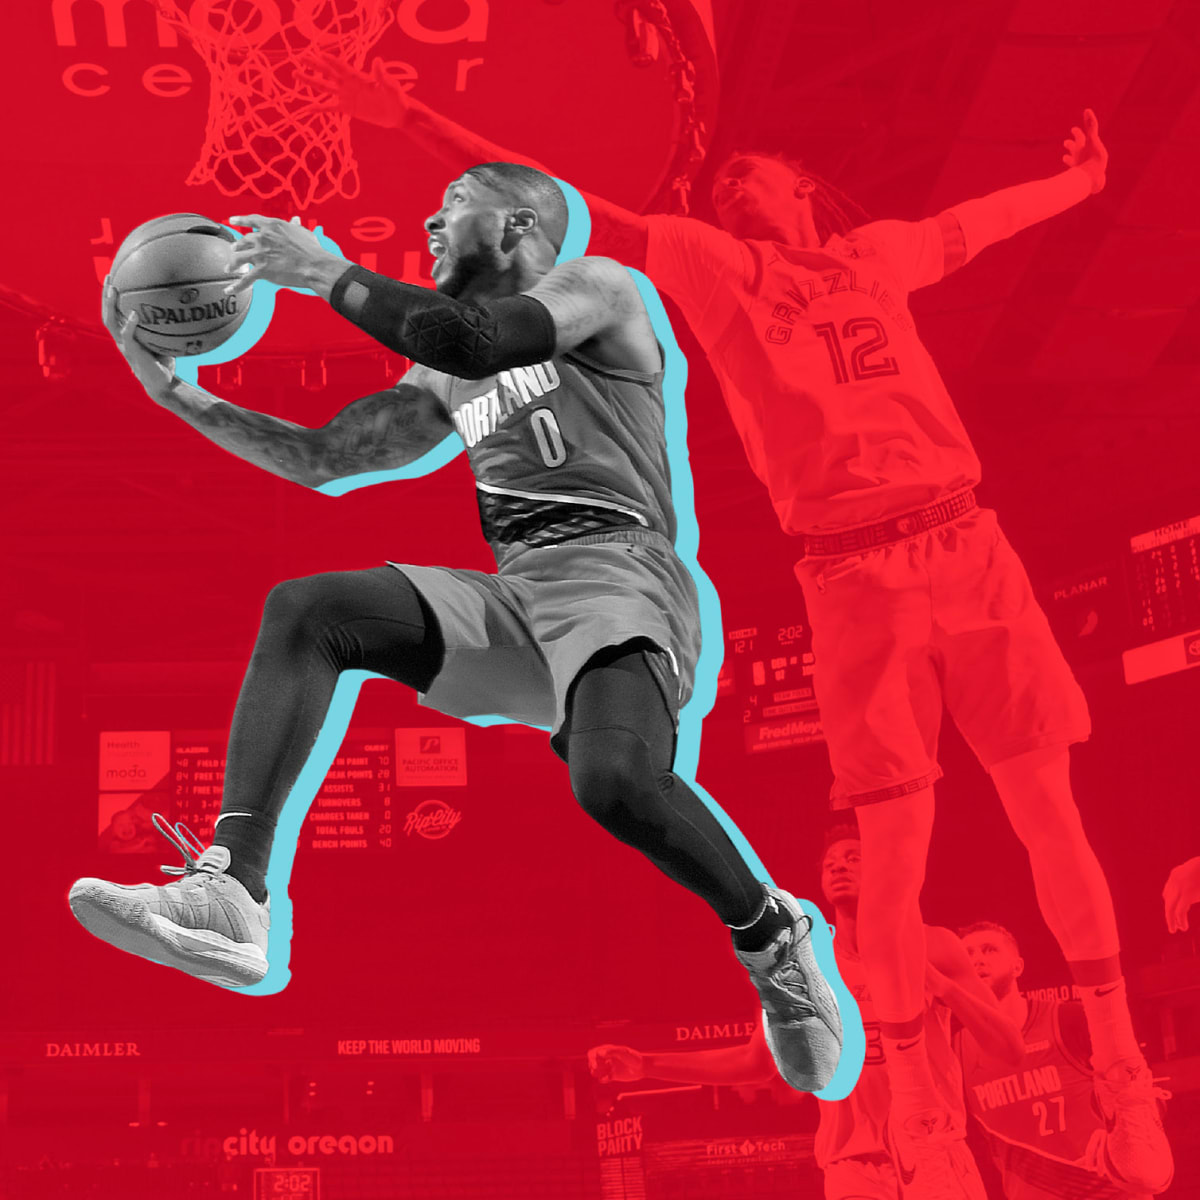 Found an awesome wallpaper for Damian lillard fans. He made an amazing game  winner today for the play off first round. : r/ripcity